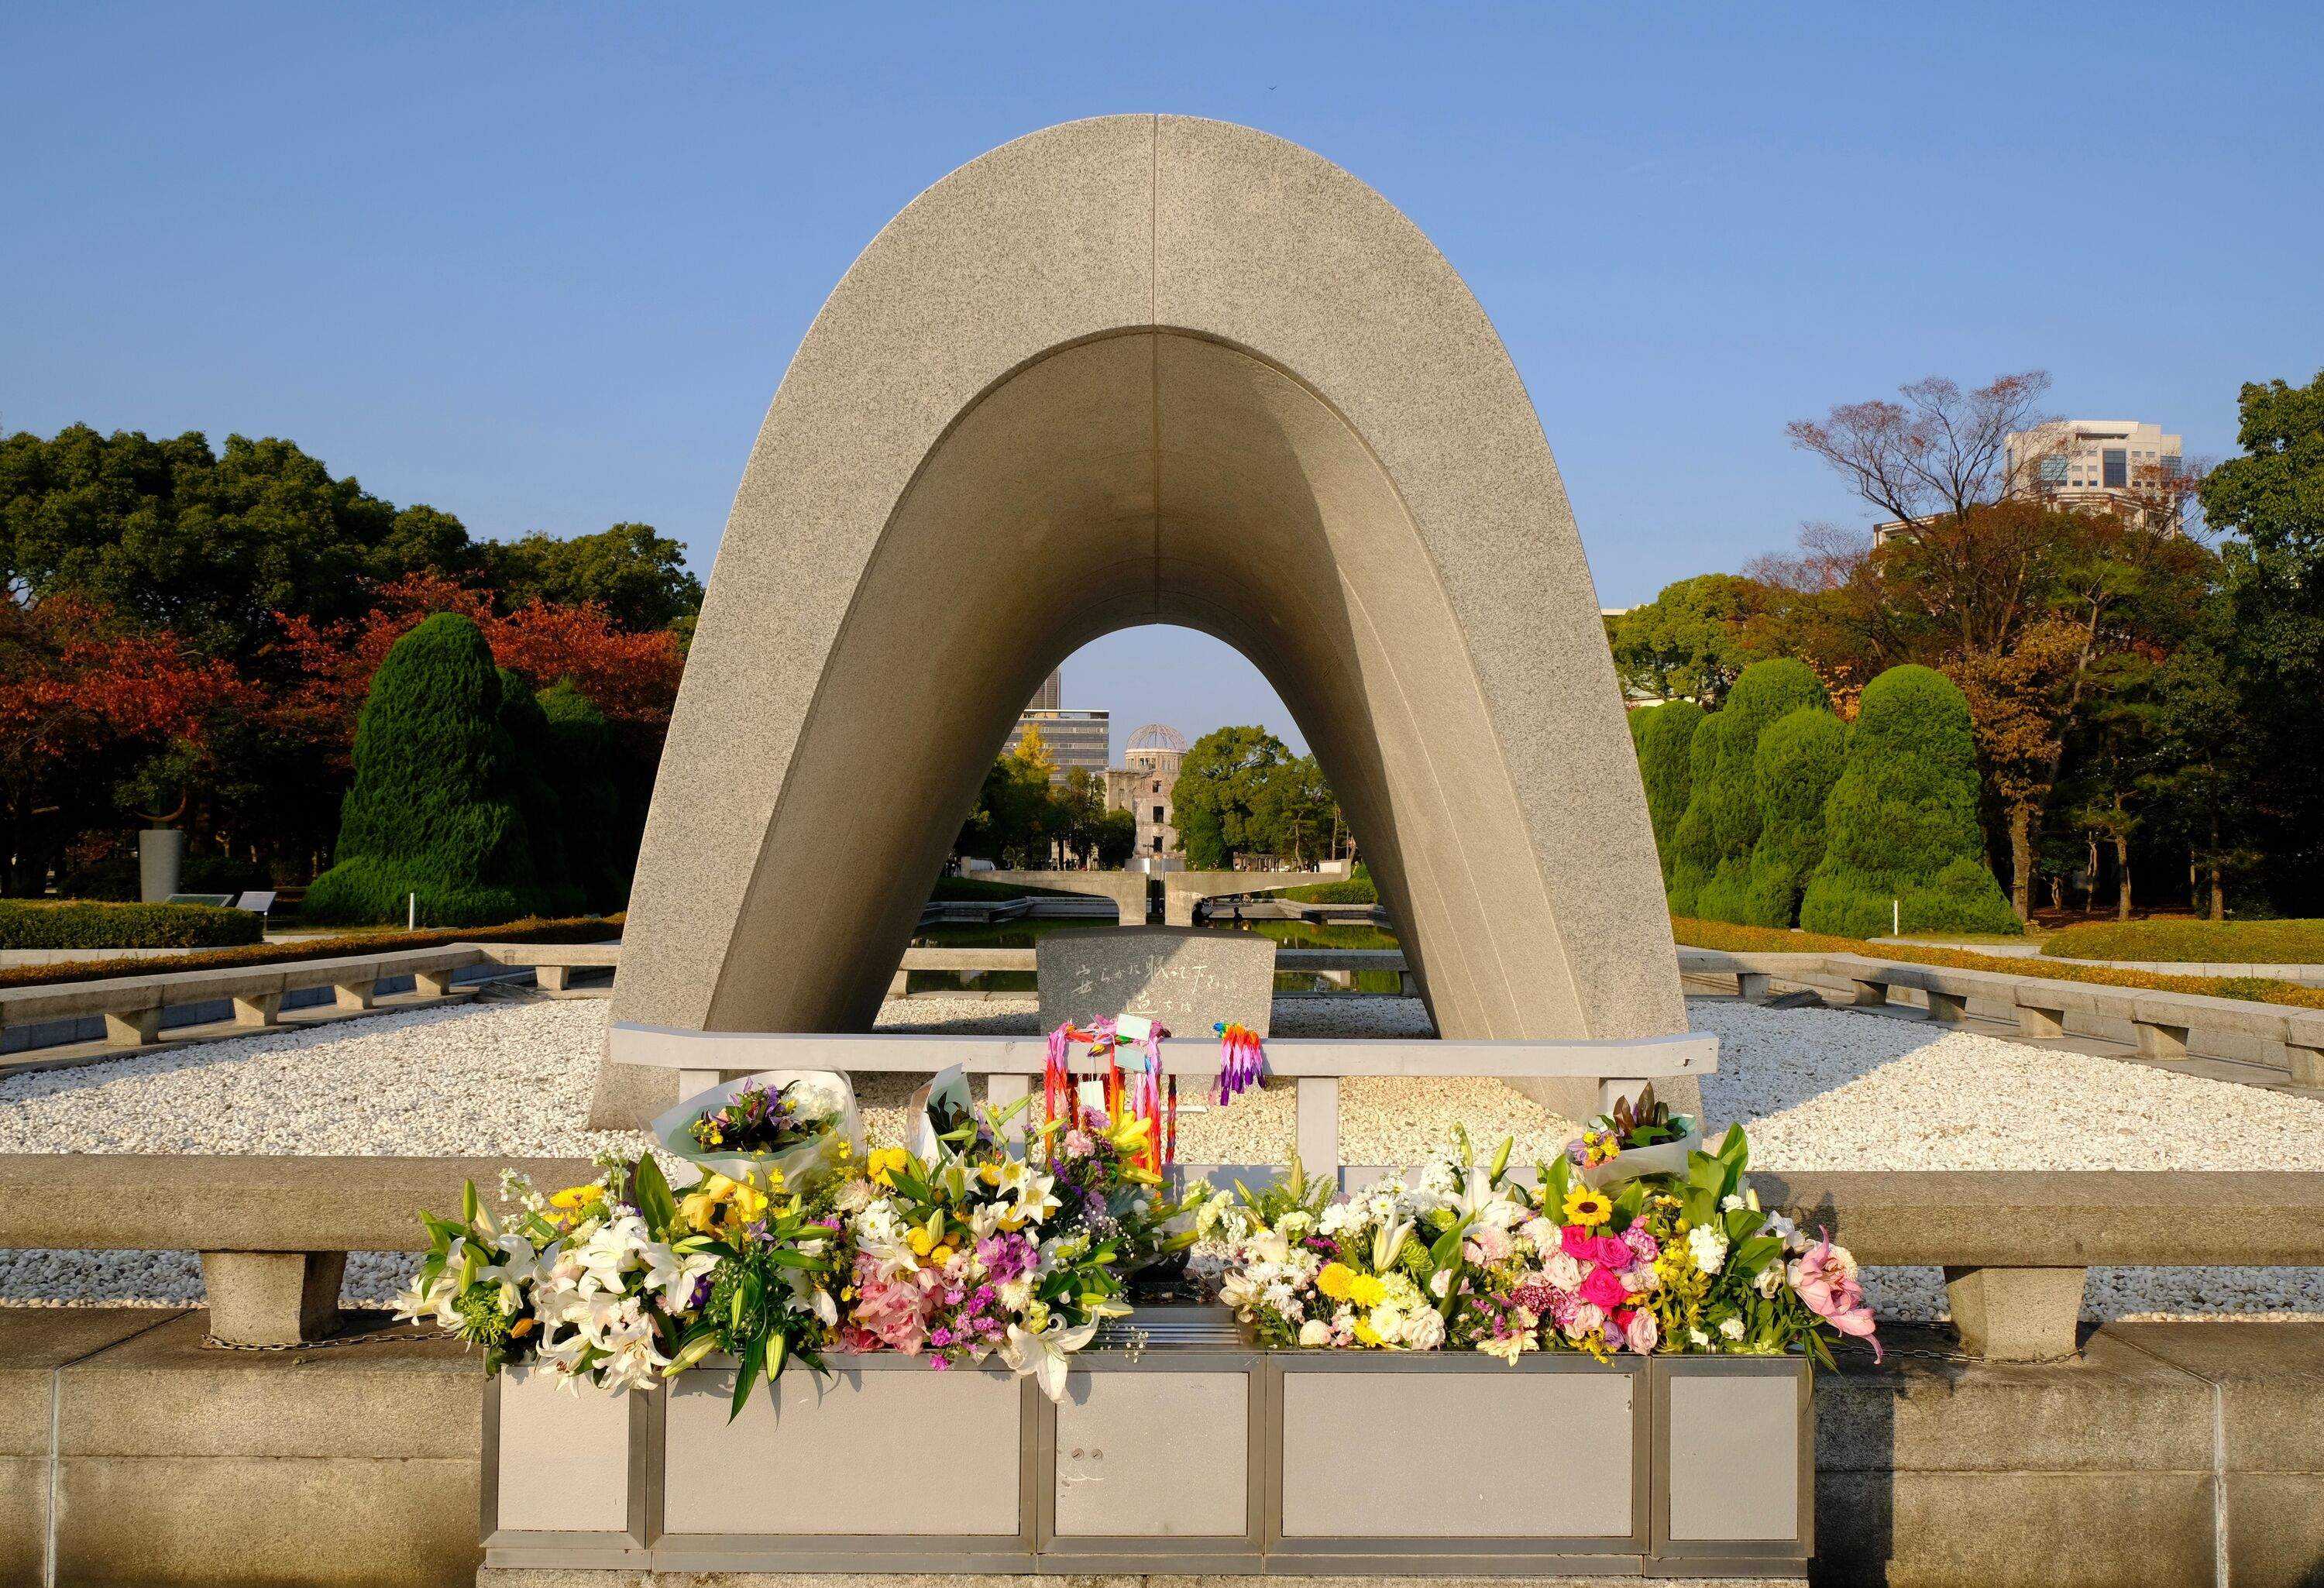 The Hiroshima Victims Memorial Cenotaph is a long, curved concrete structure that resembles an ancient tomb open at both ends.